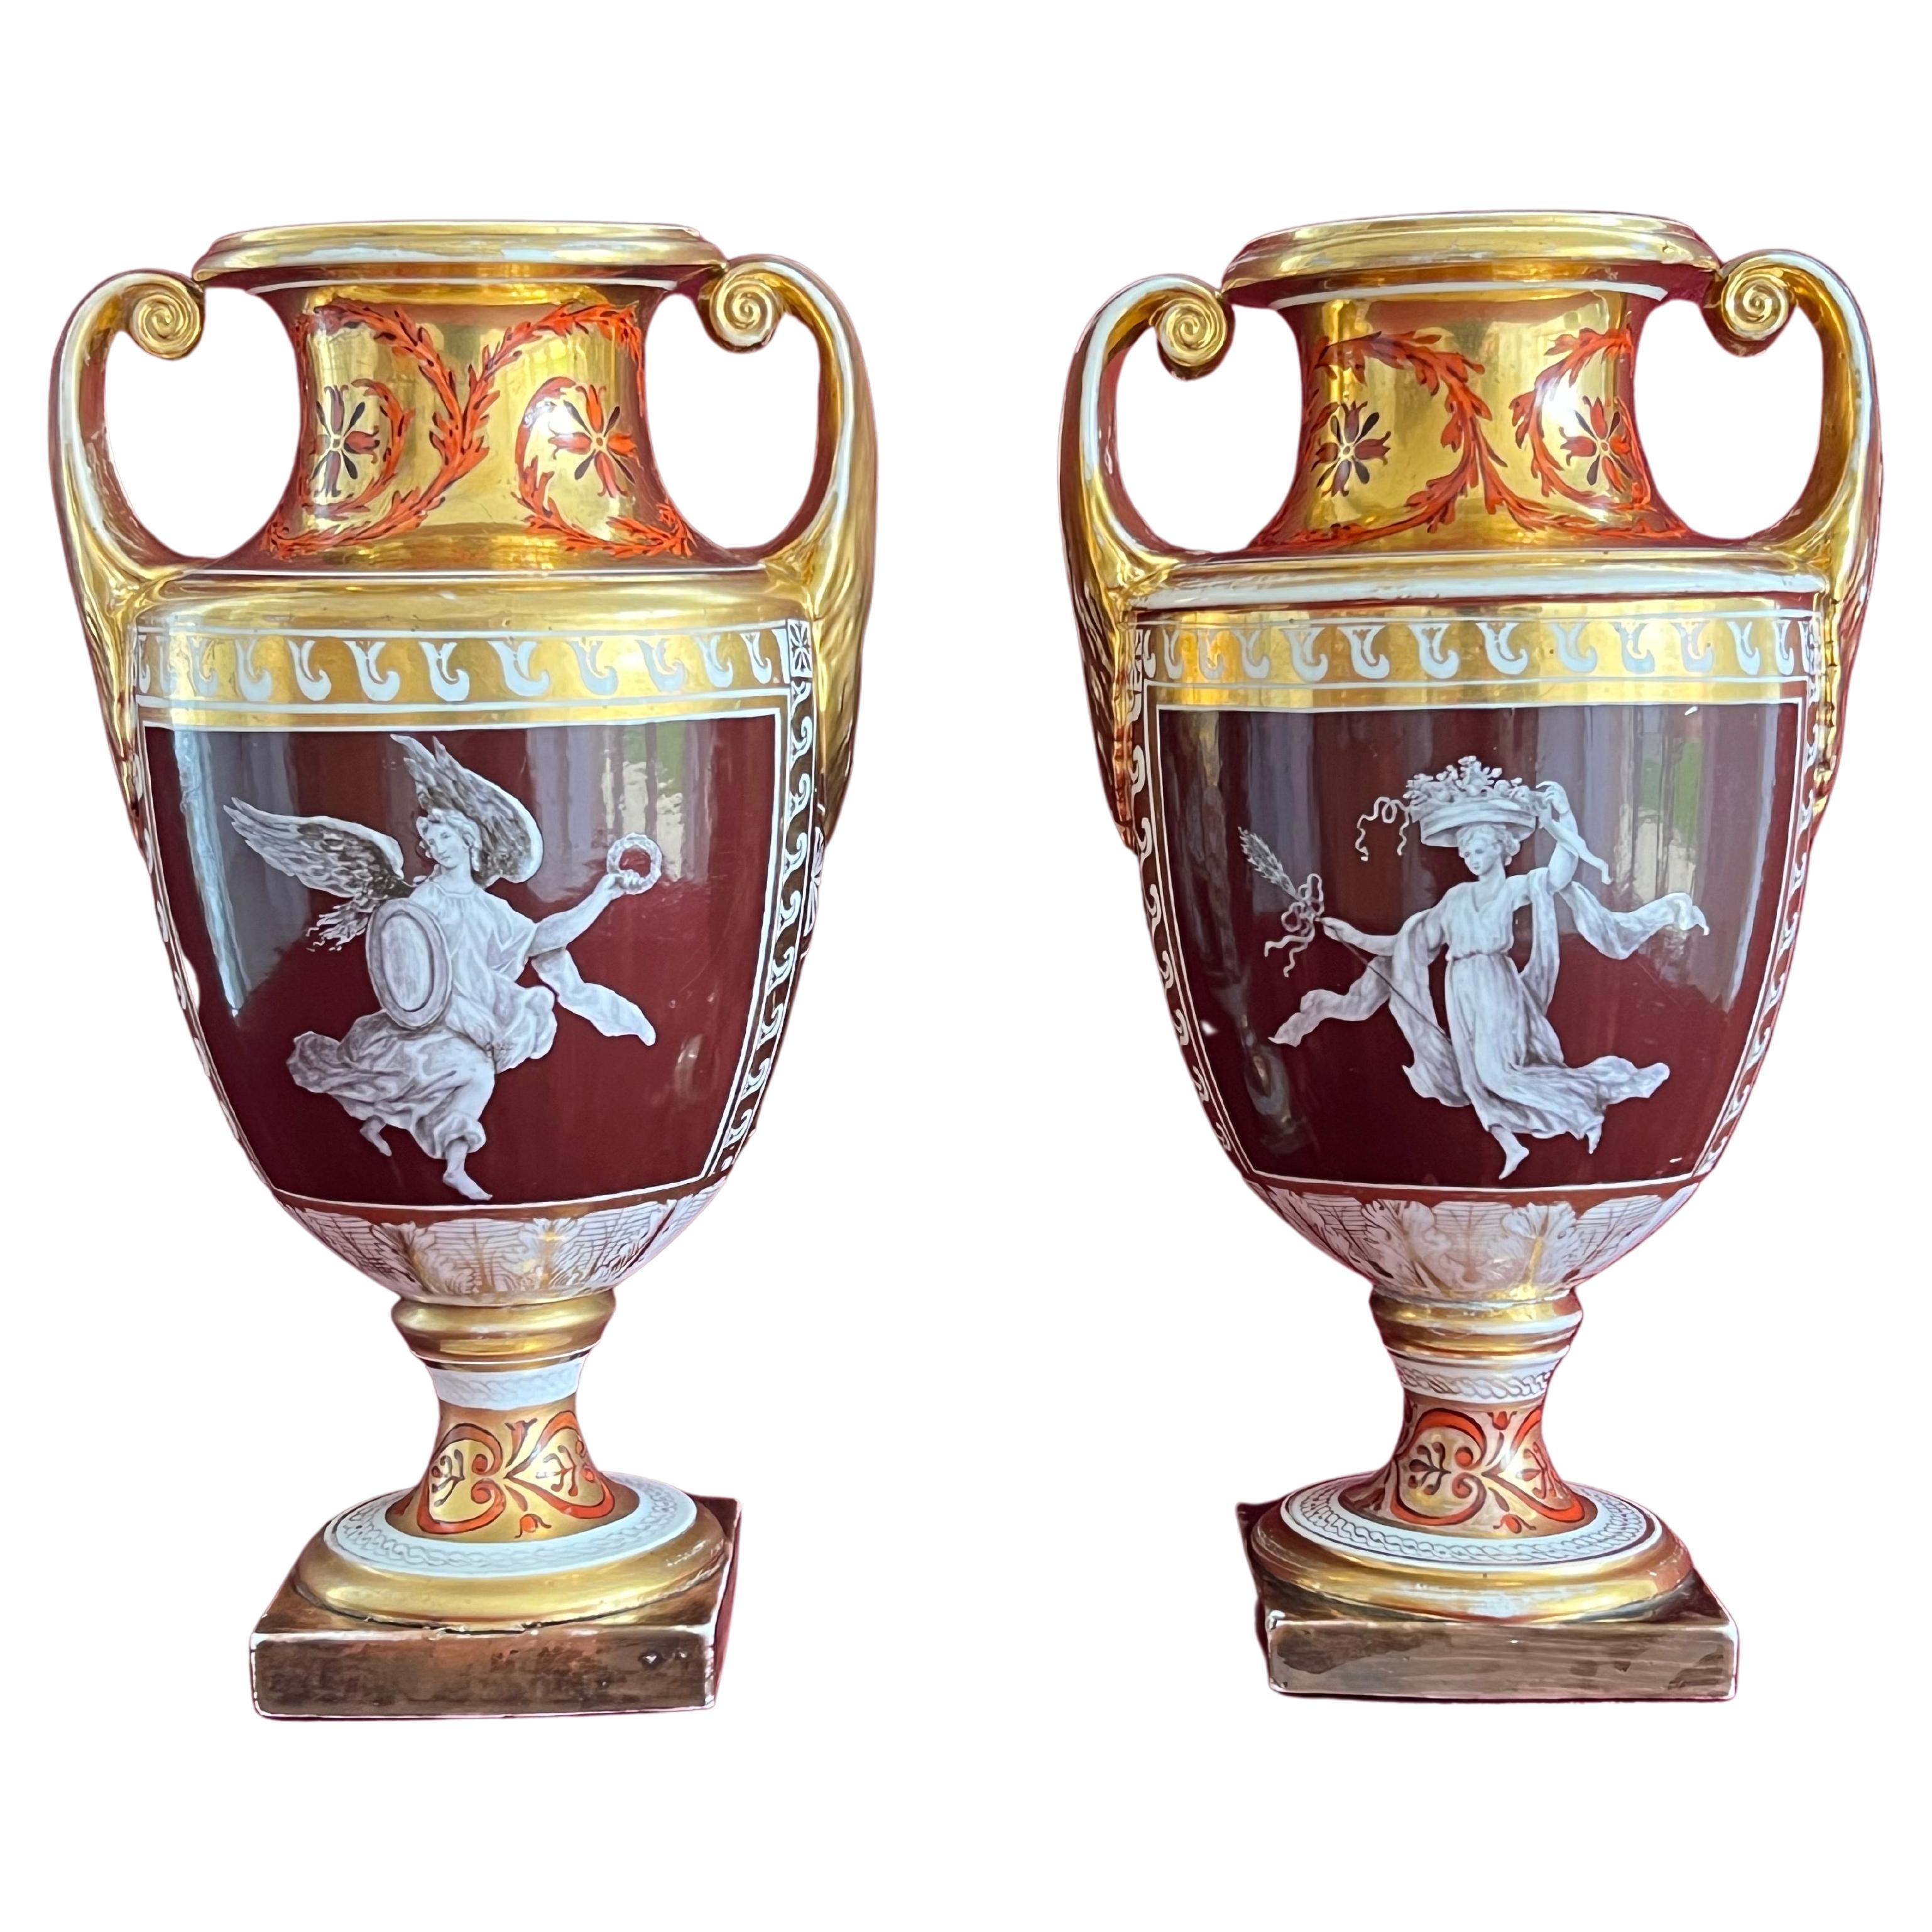 A rare pair of Coalport porcelain vases decorated by Thomas Baxter